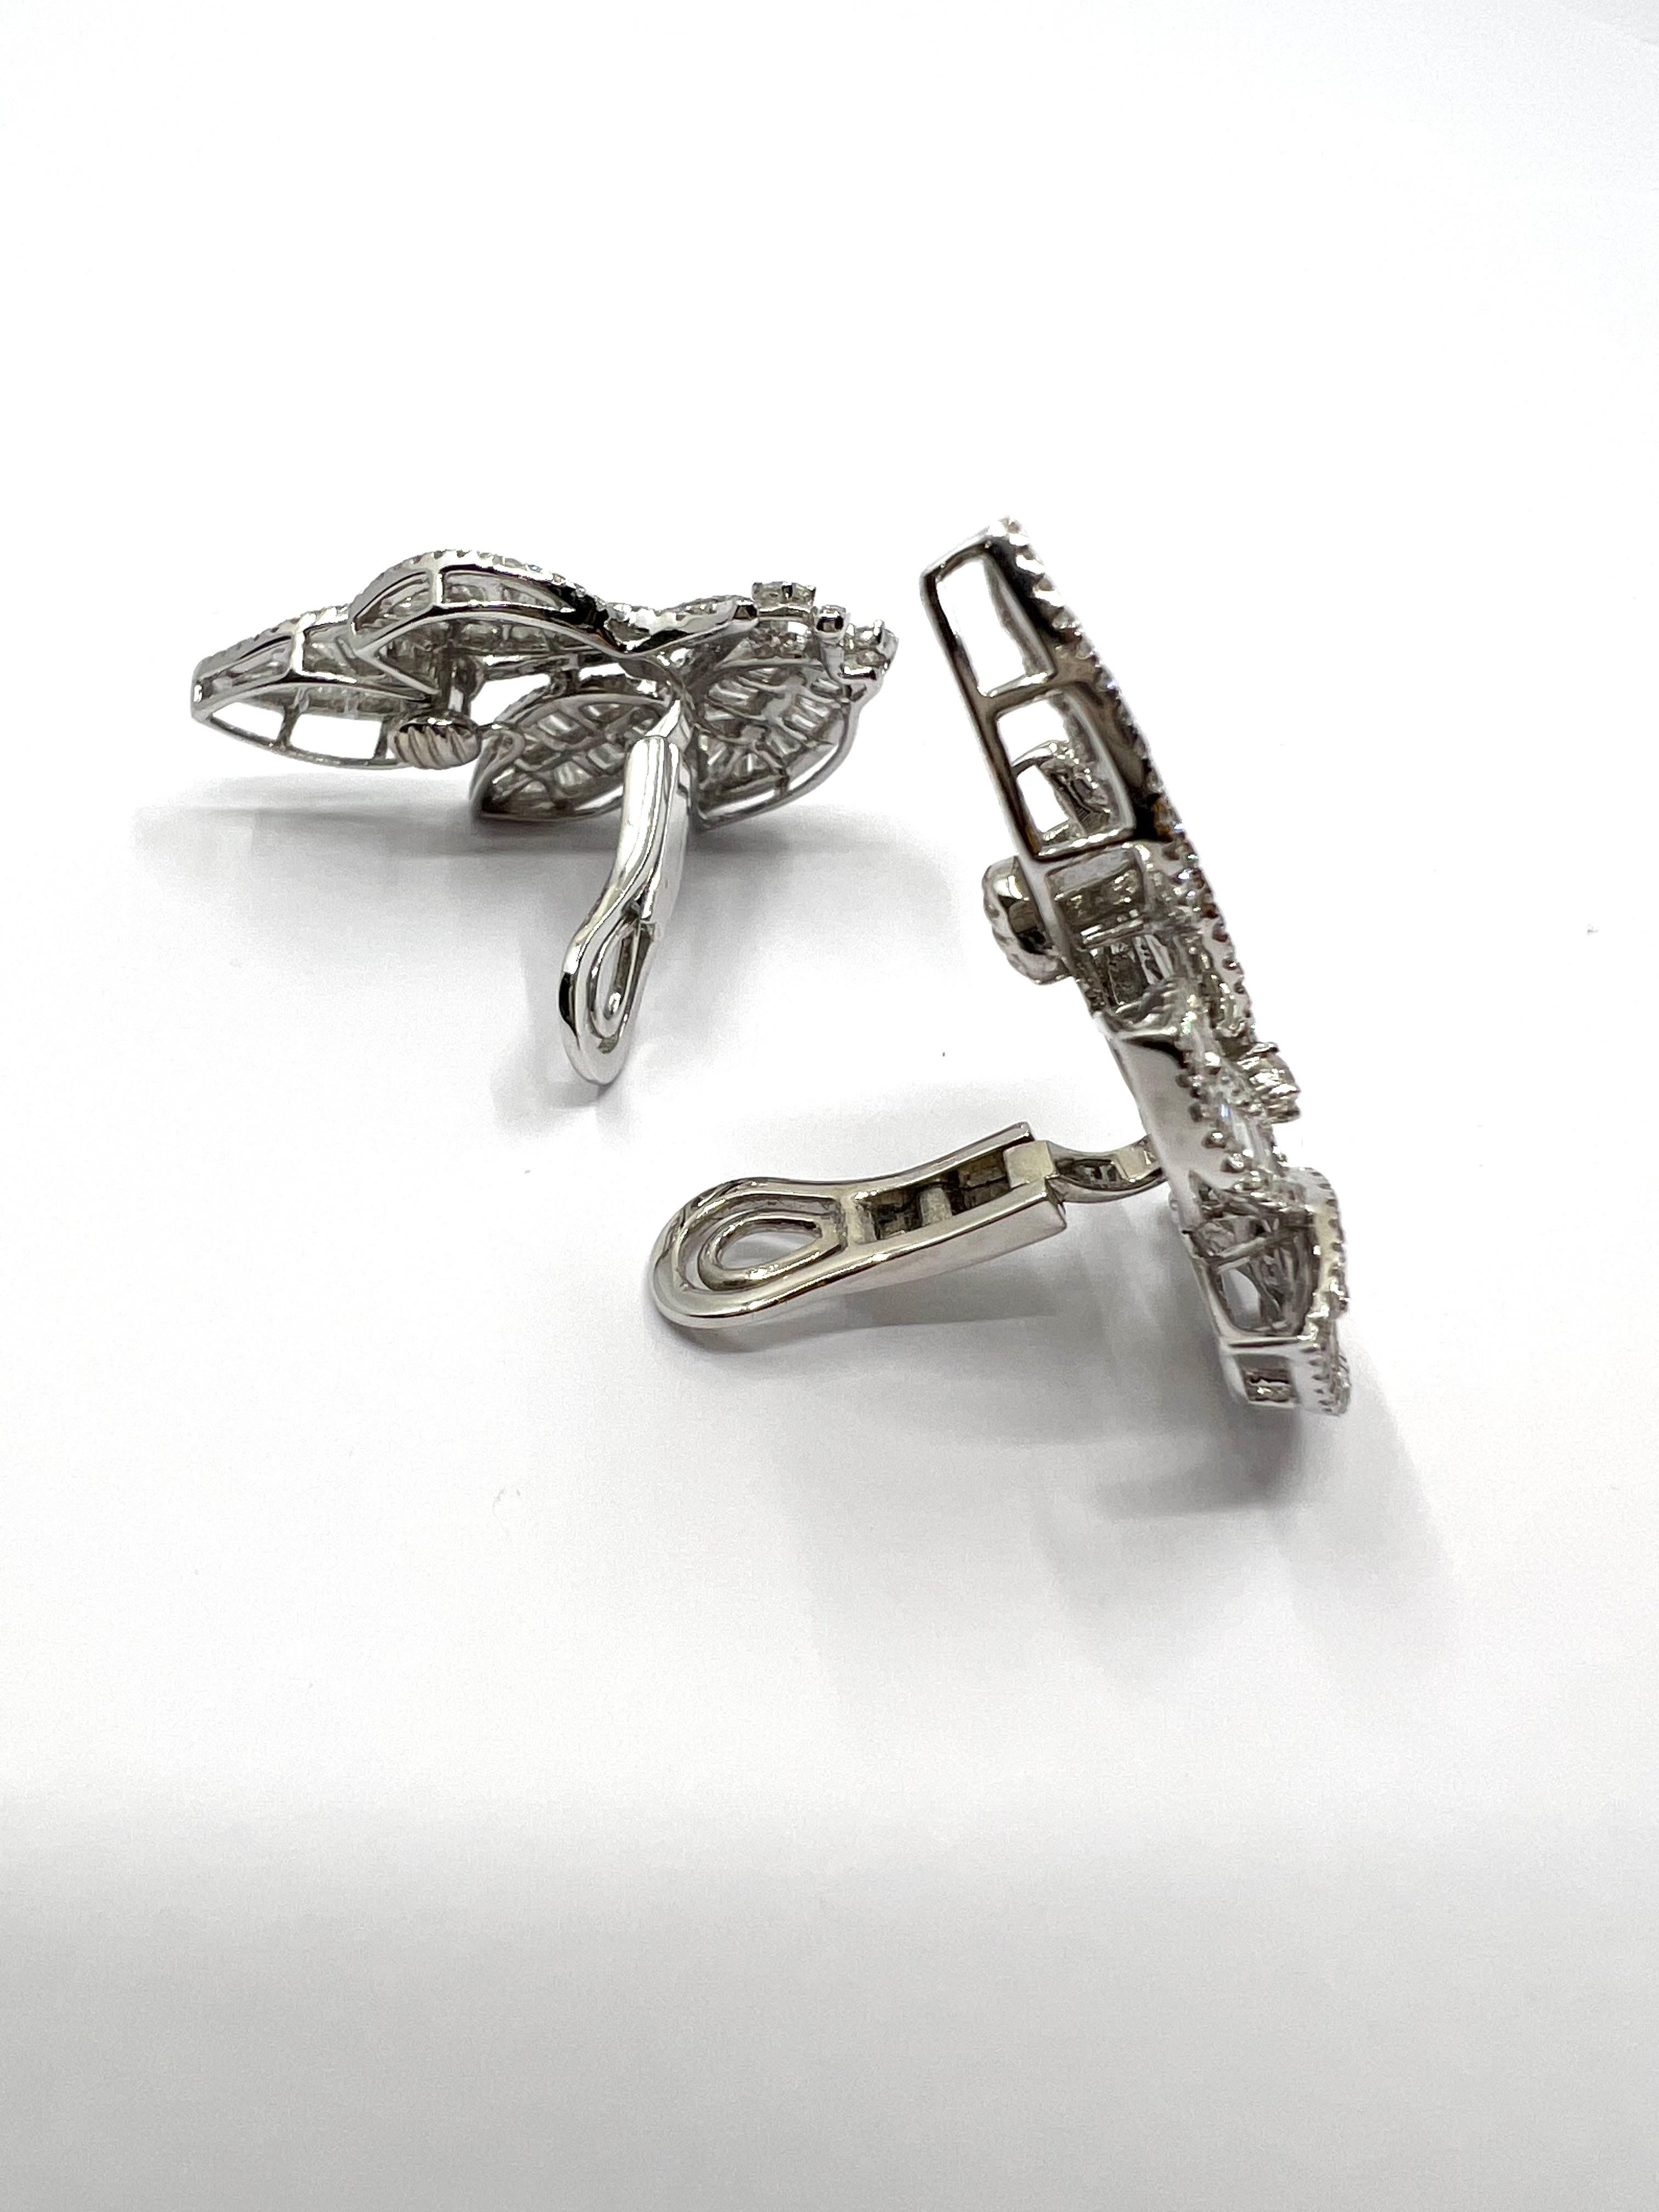 Modern Leaves earrings diamonds paved (6 carats) set on white gold.  For Sale